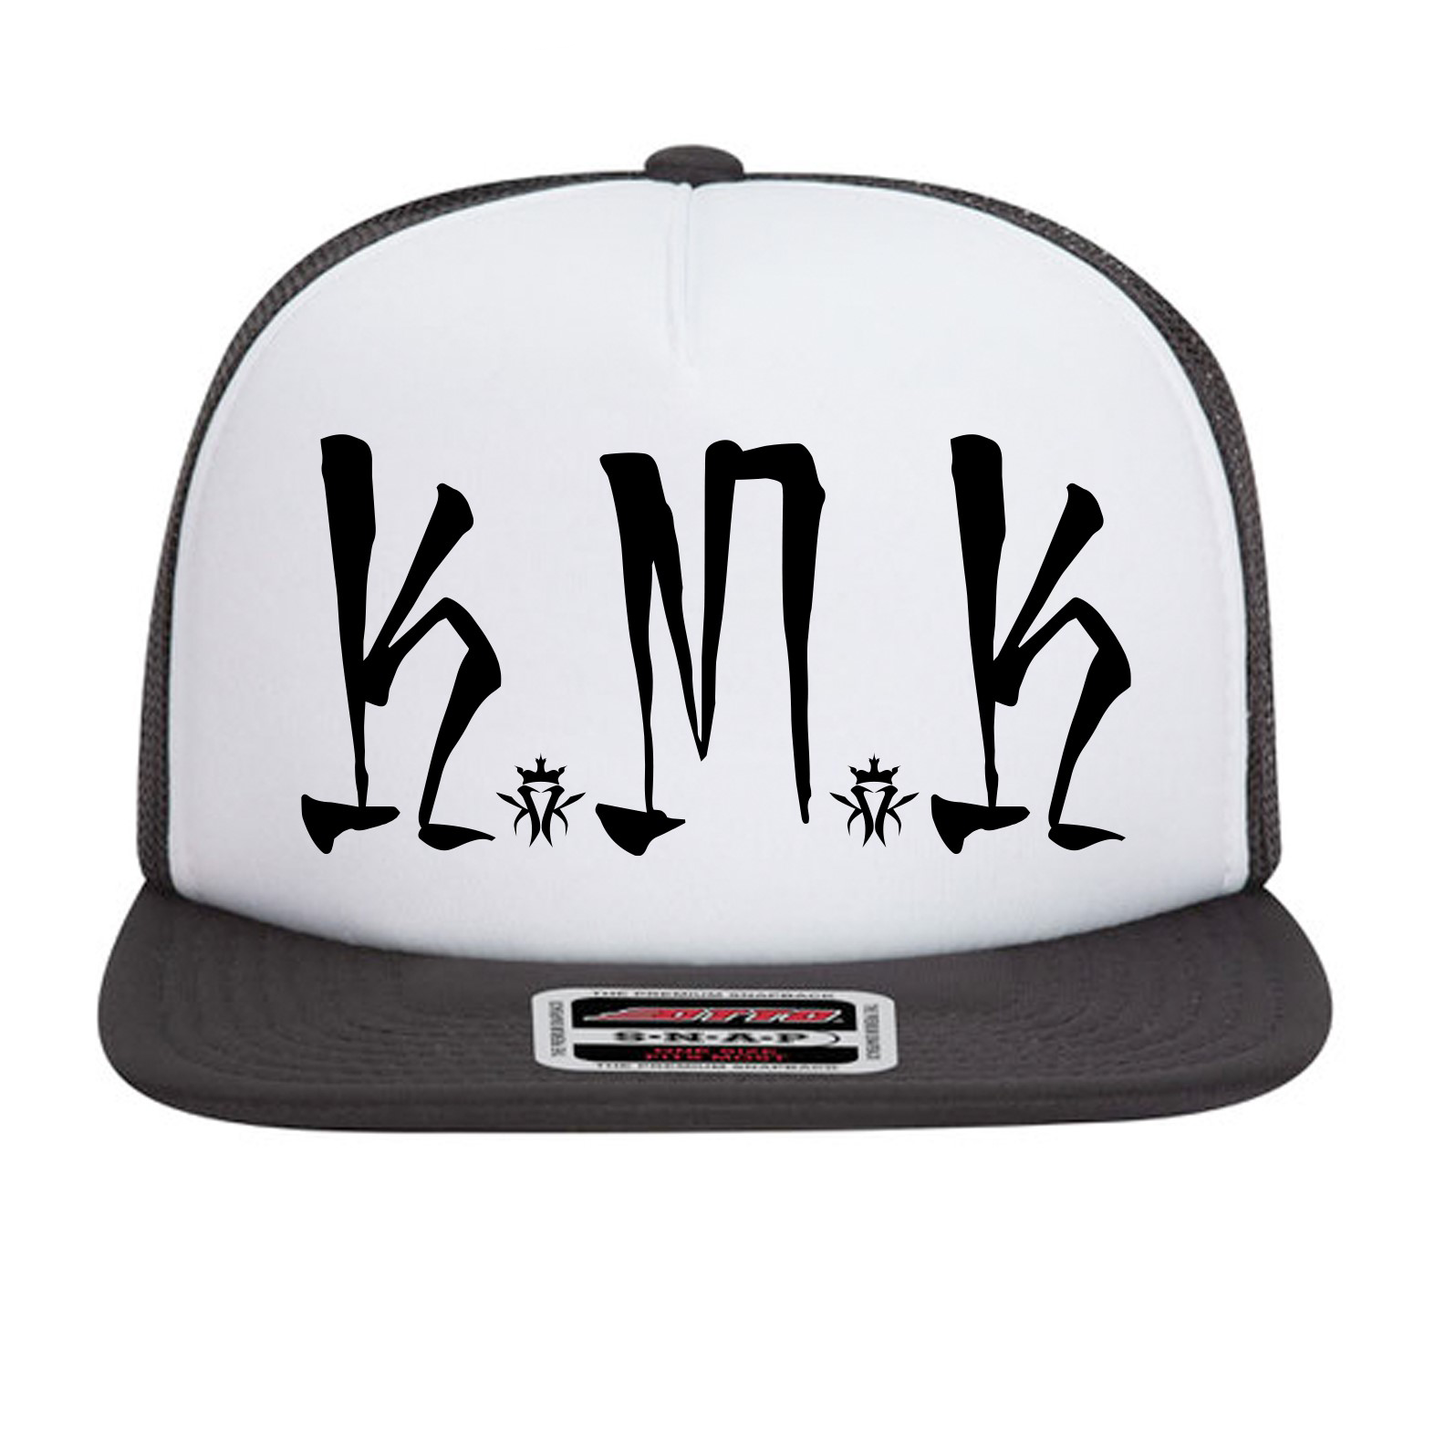 Kottonmouth Rollin Stoned Hat - Black Letters